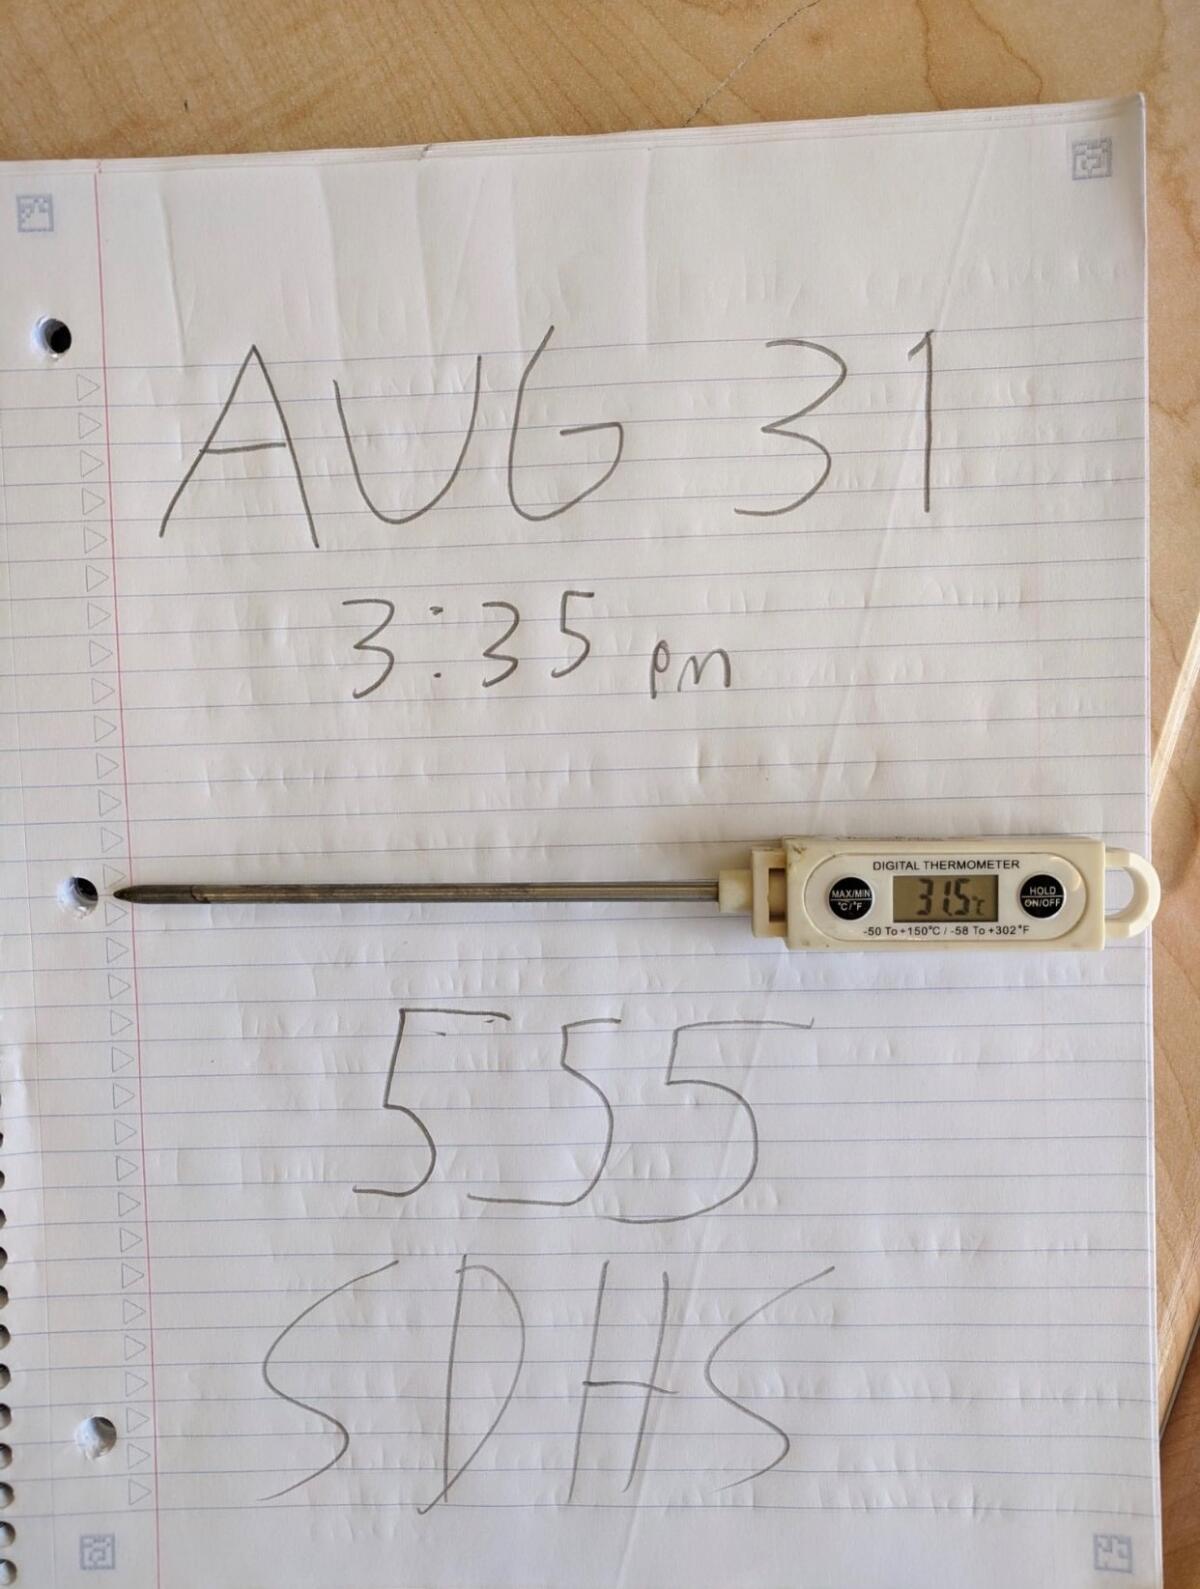 A thermometer reading "31.5" sits on a sheet of ruled paper that says "Aug. 31, 3:35 p.m., 555 SDHS"